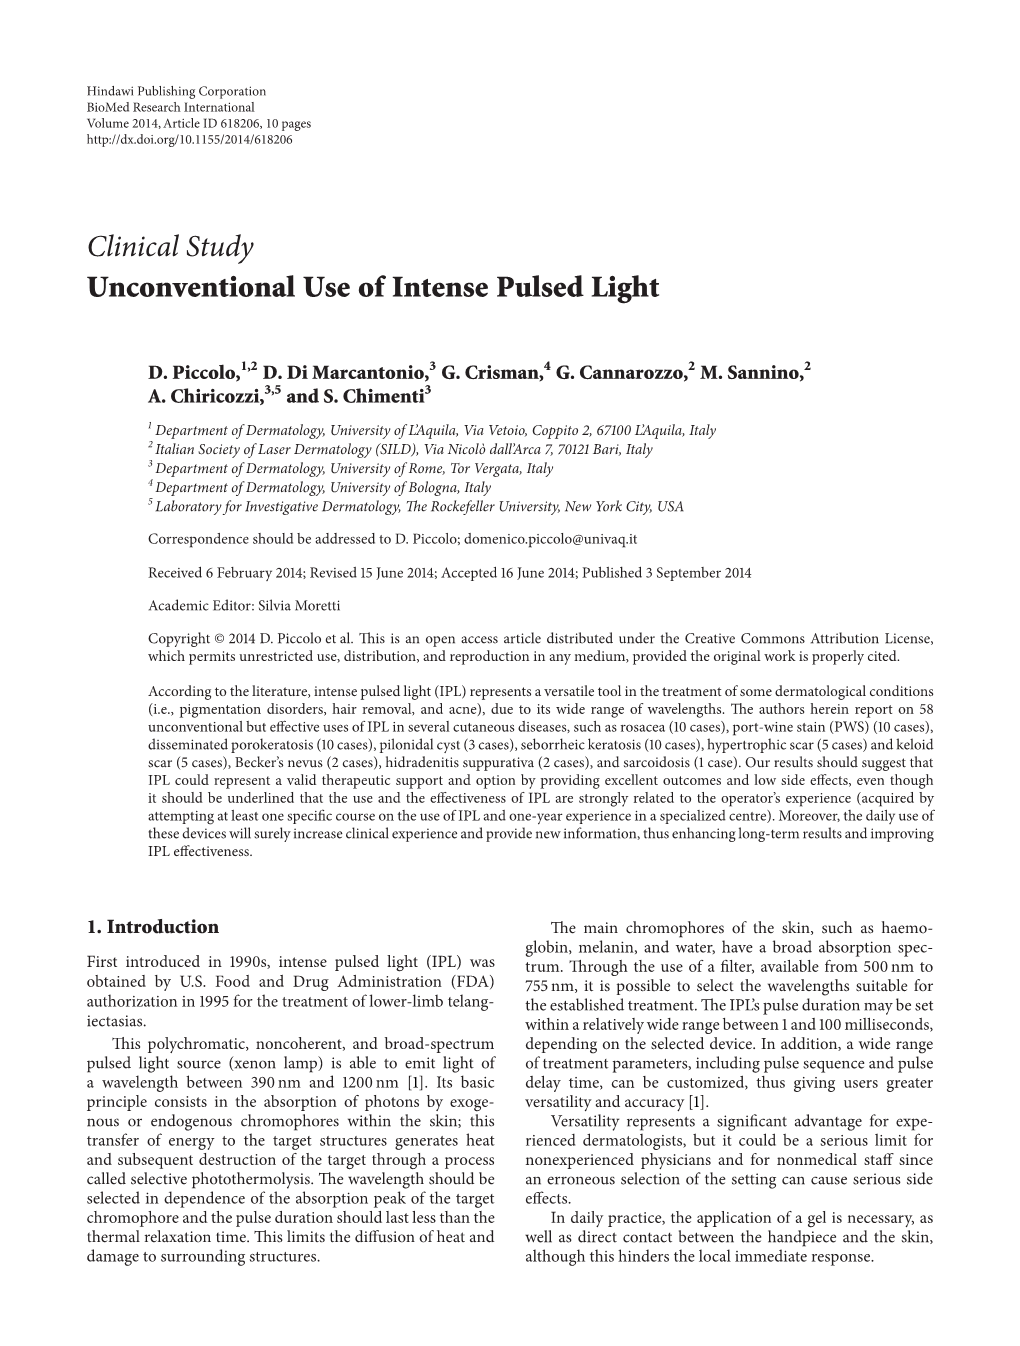 Unconventional Use of Intense Pulsed Light